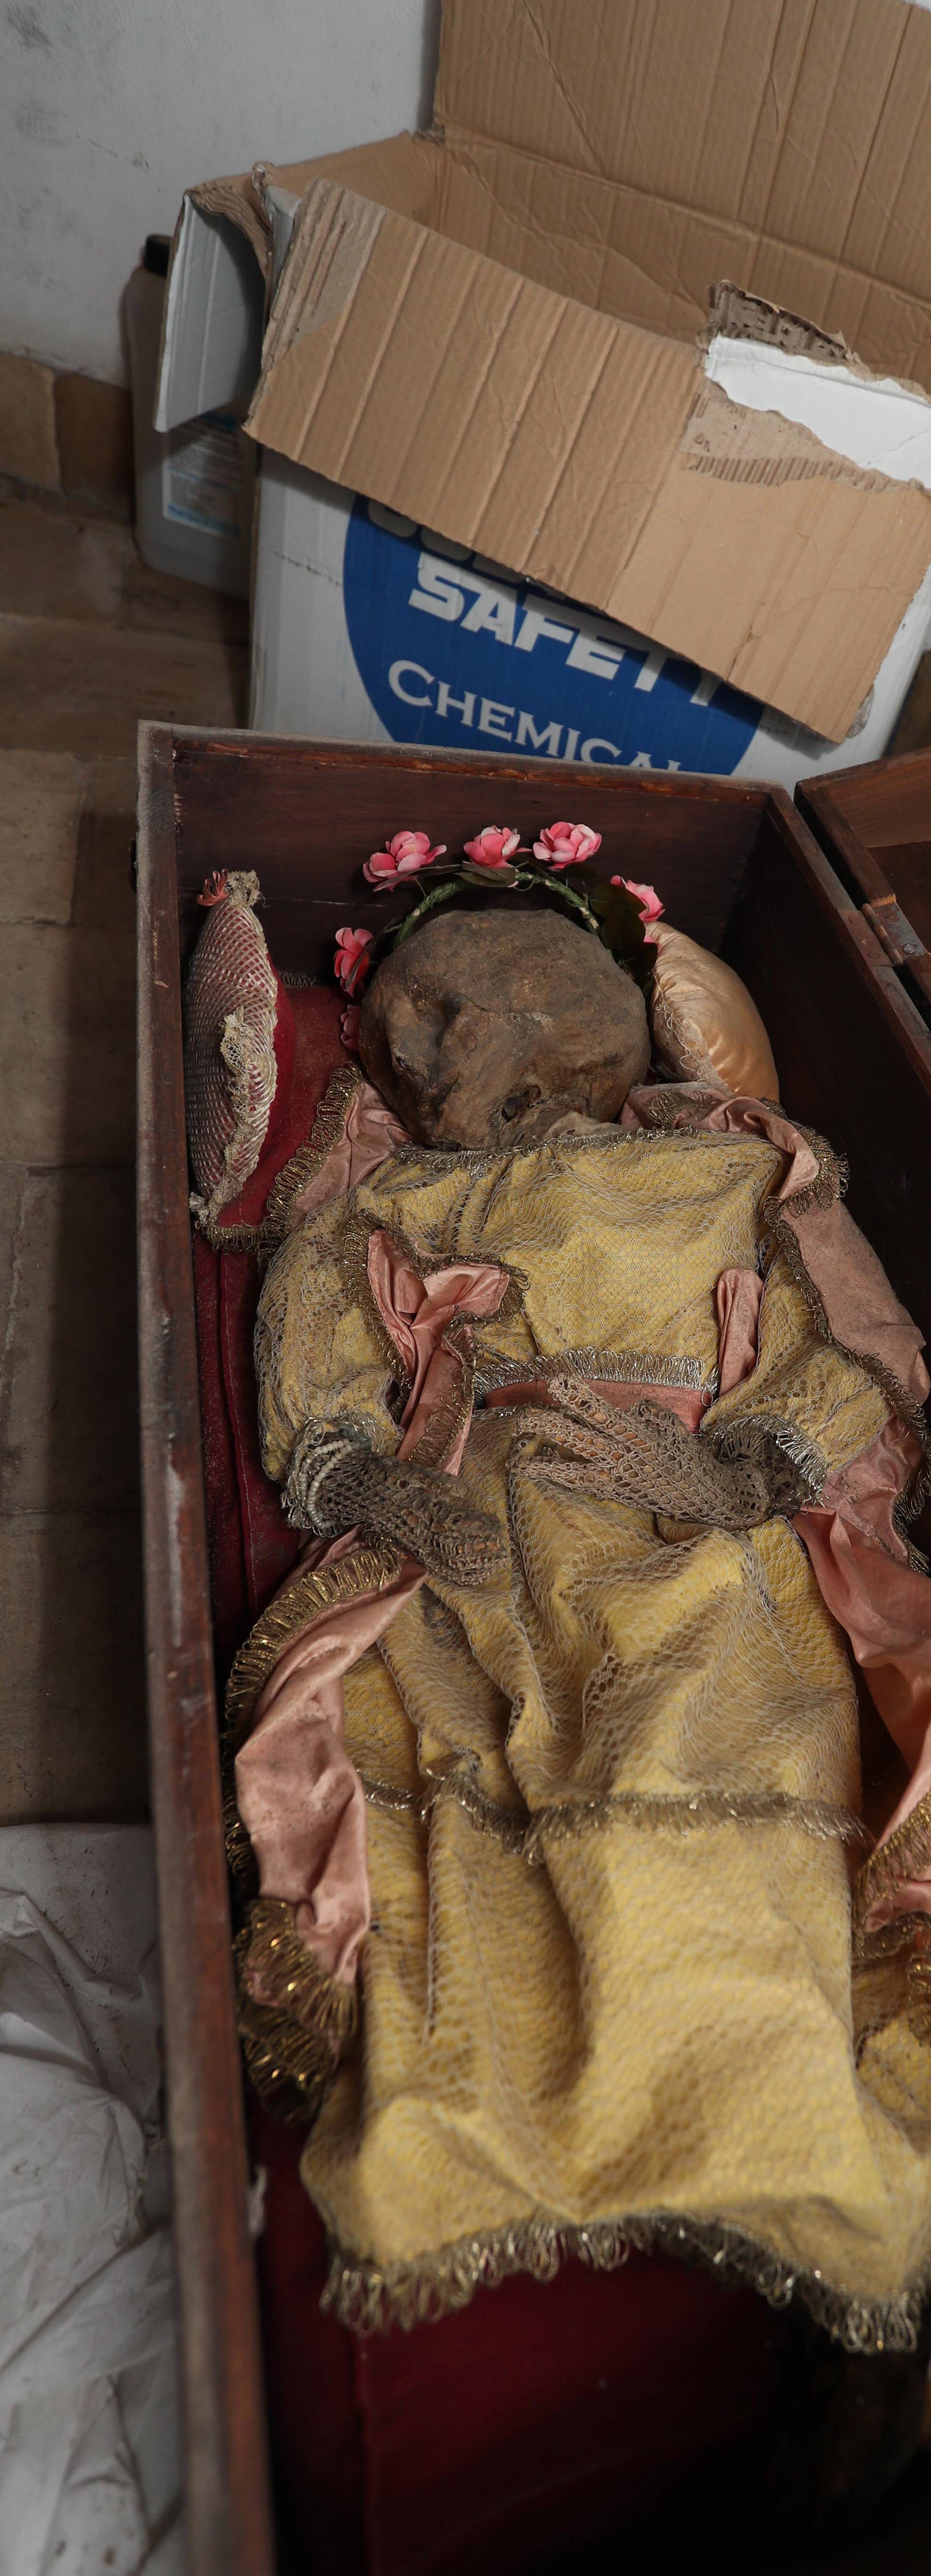 Palermo, a mummified child found in a trunk in the graveyard of the scrolls